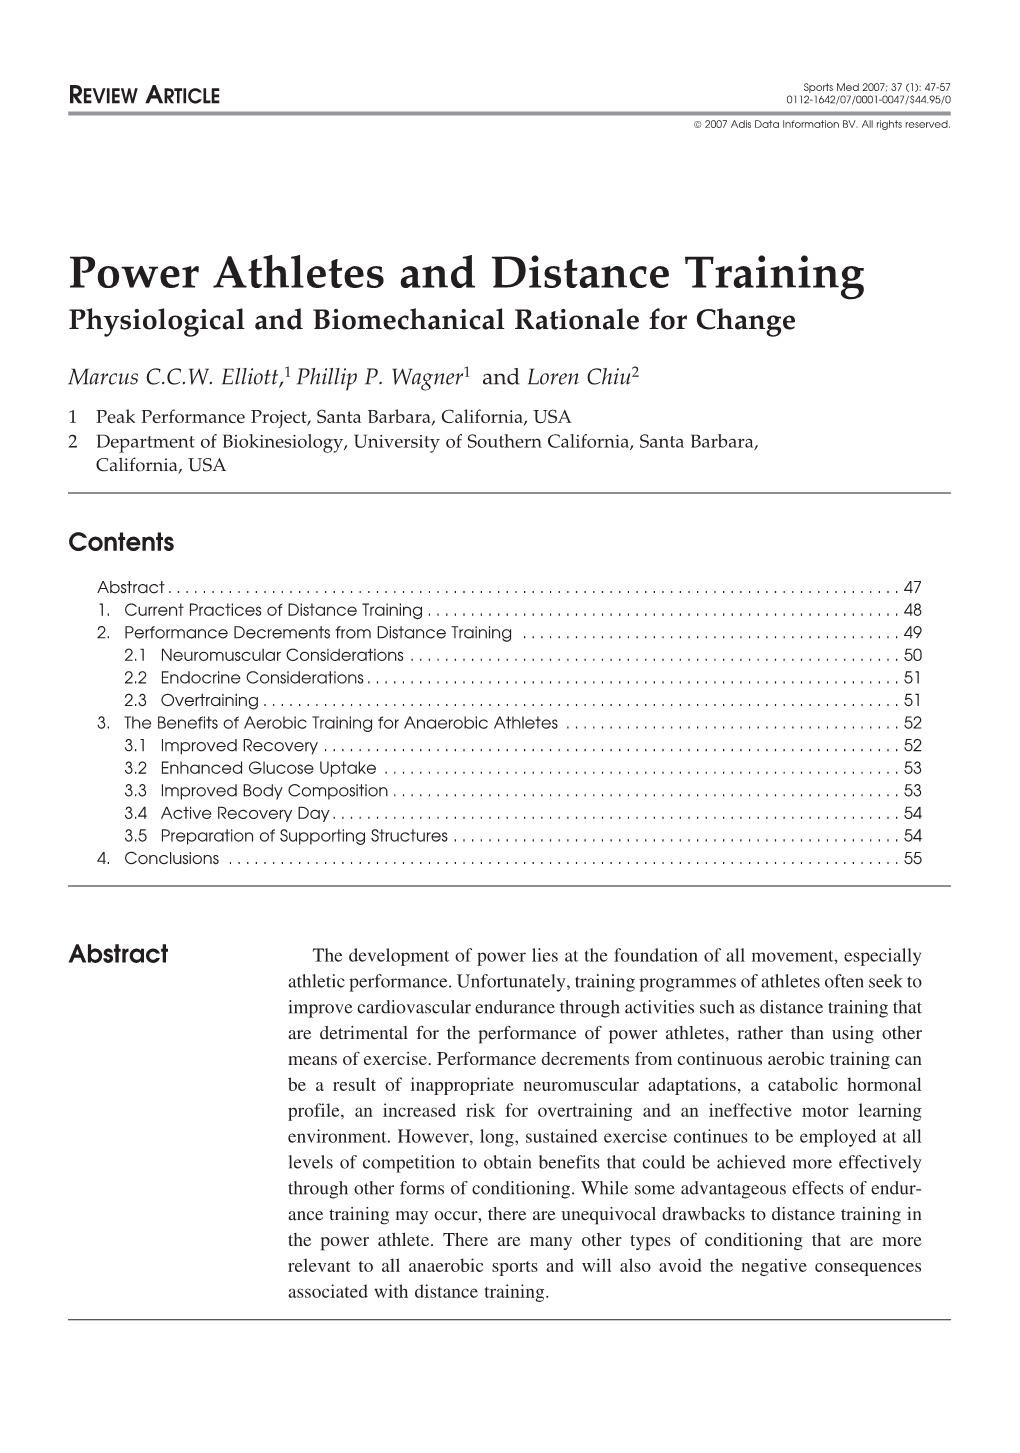 Power Athletes and Distance Training Physiological and Biomechanical Rationale for Change